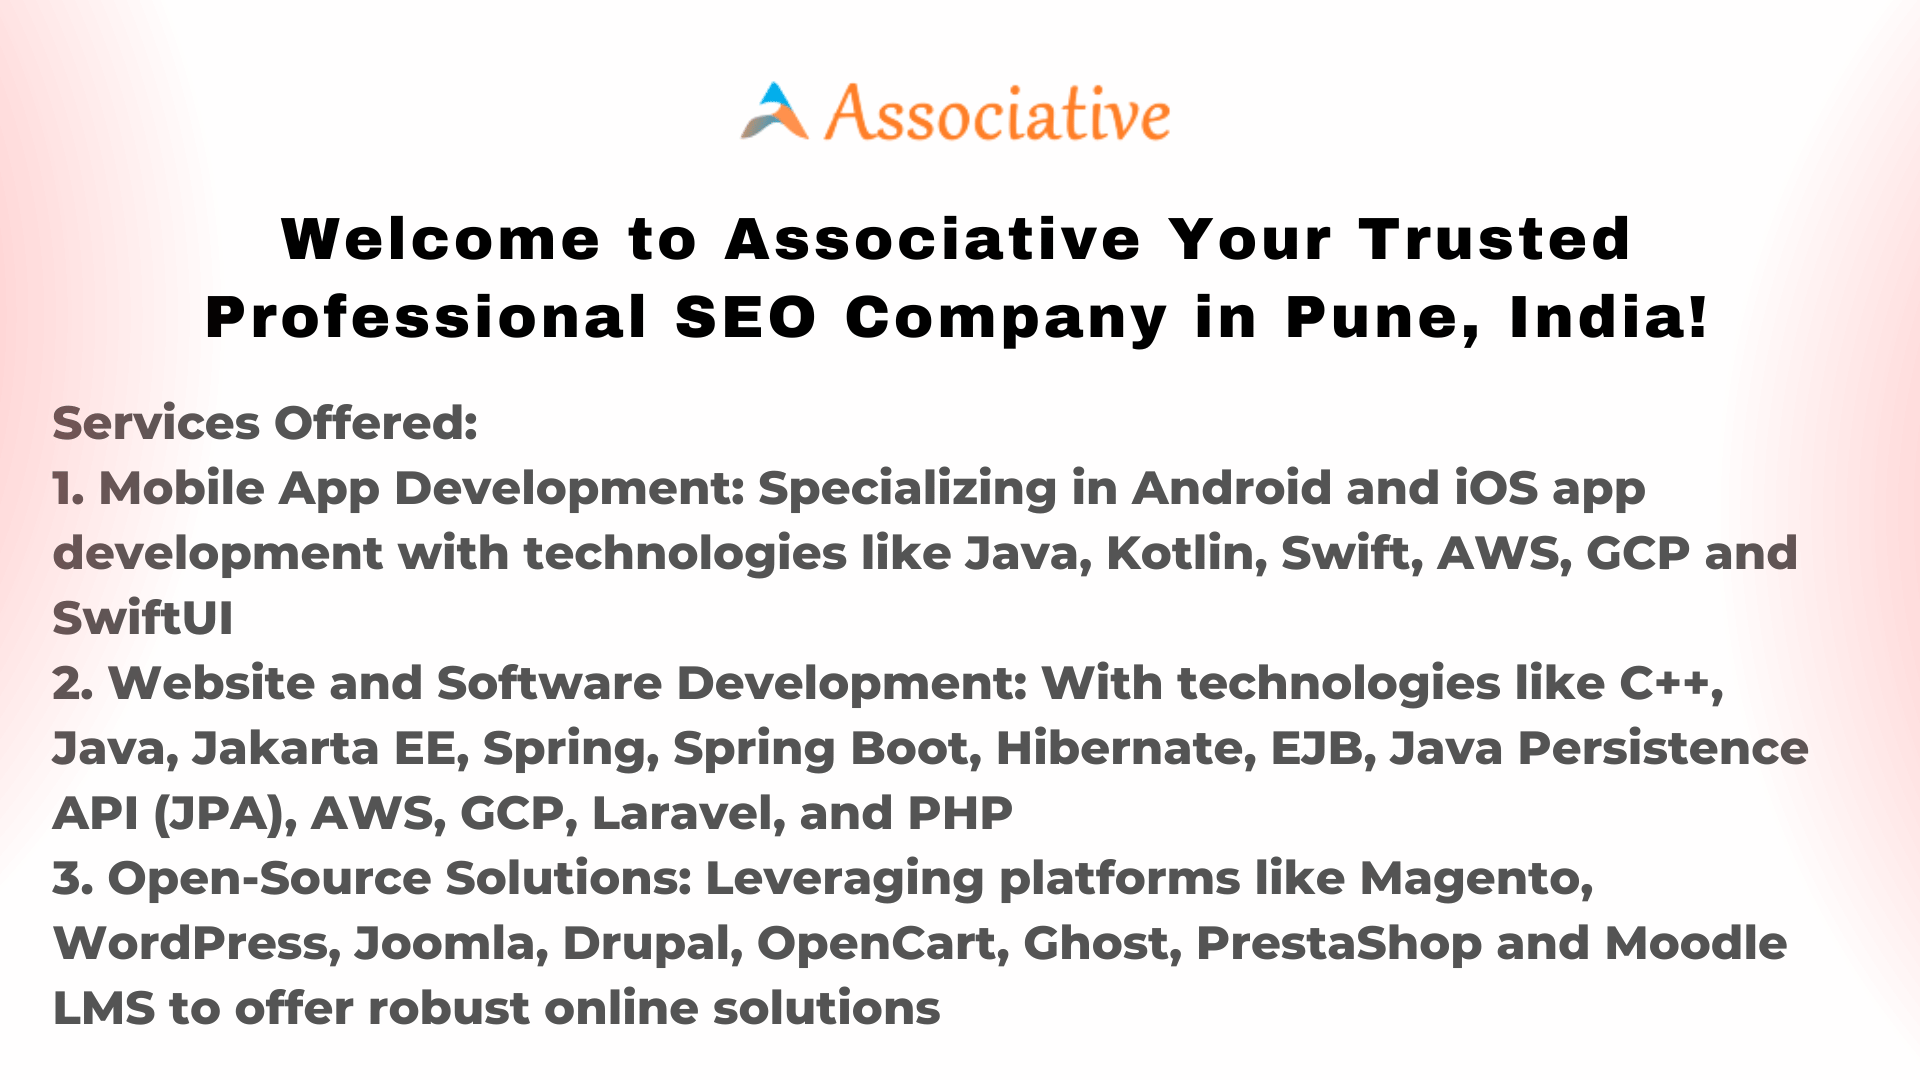 Welcome to Associative Your Trusted Professional SEO Company in Pune India